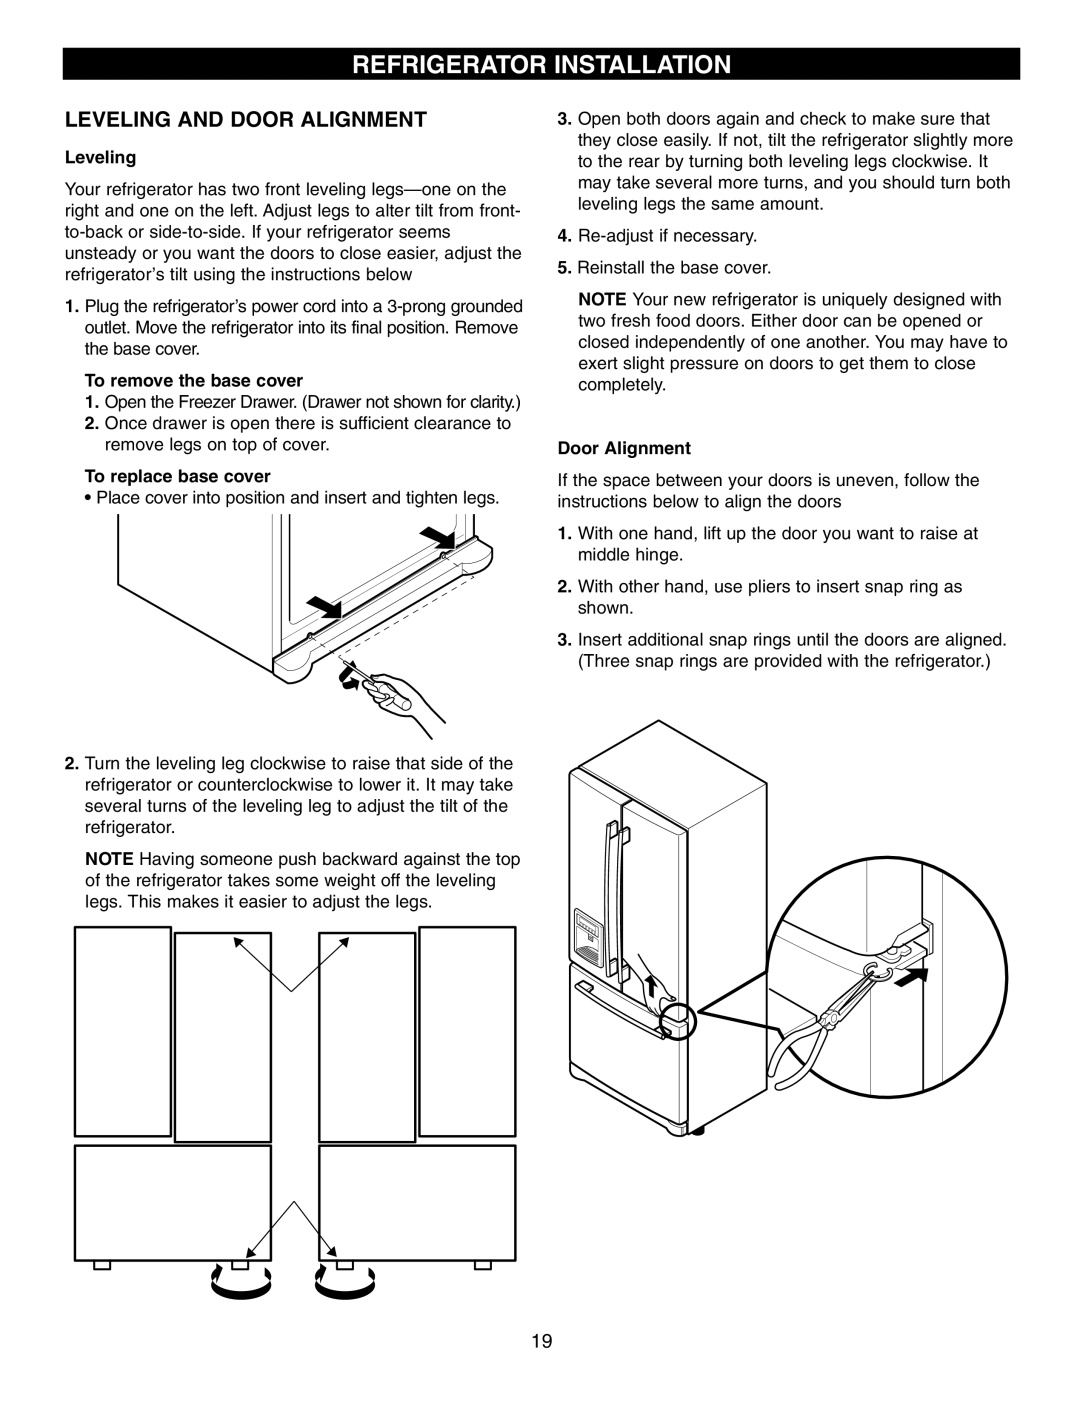 LG Electronics LFX25950 manual Refrigerator Installation, Leveling And Door Alignment, To remove the base cover 